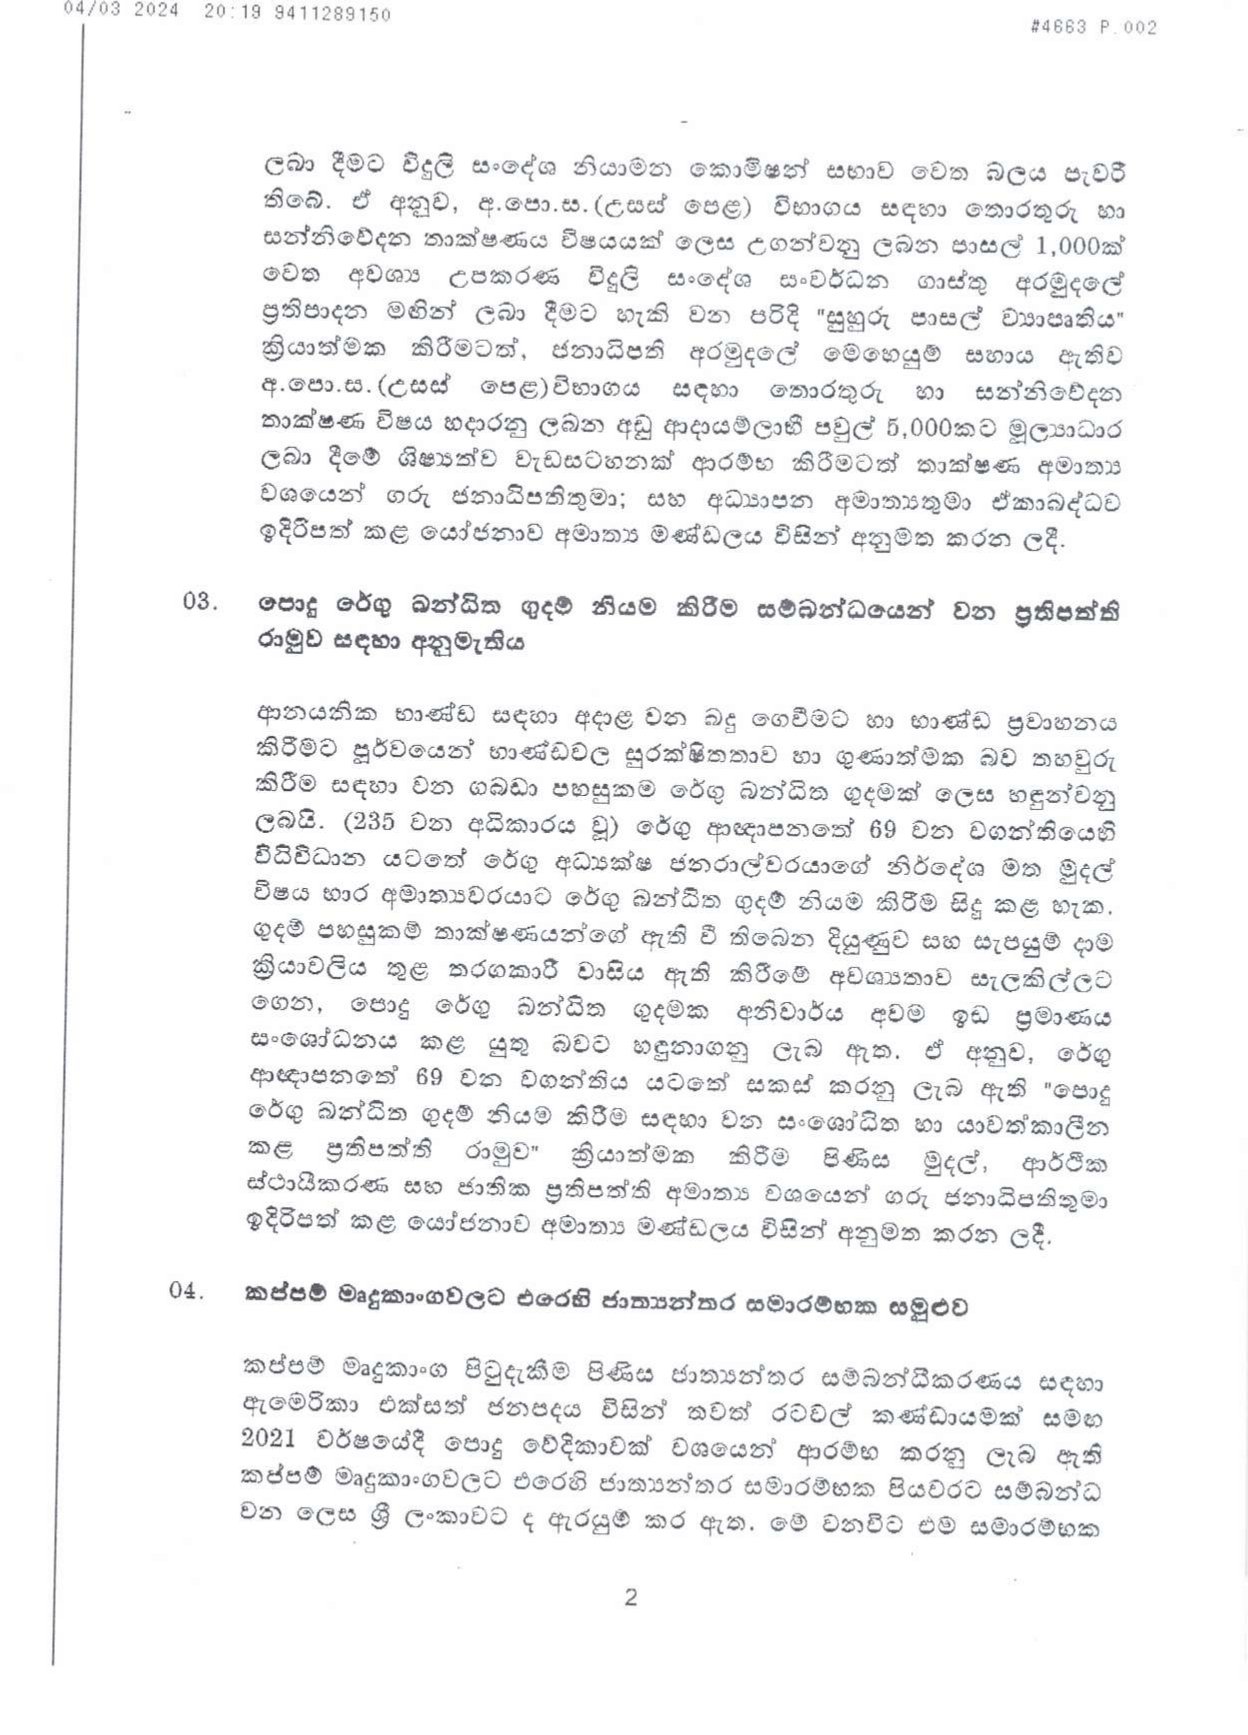 Cabinet Decision on 04.03.2024 page 0002